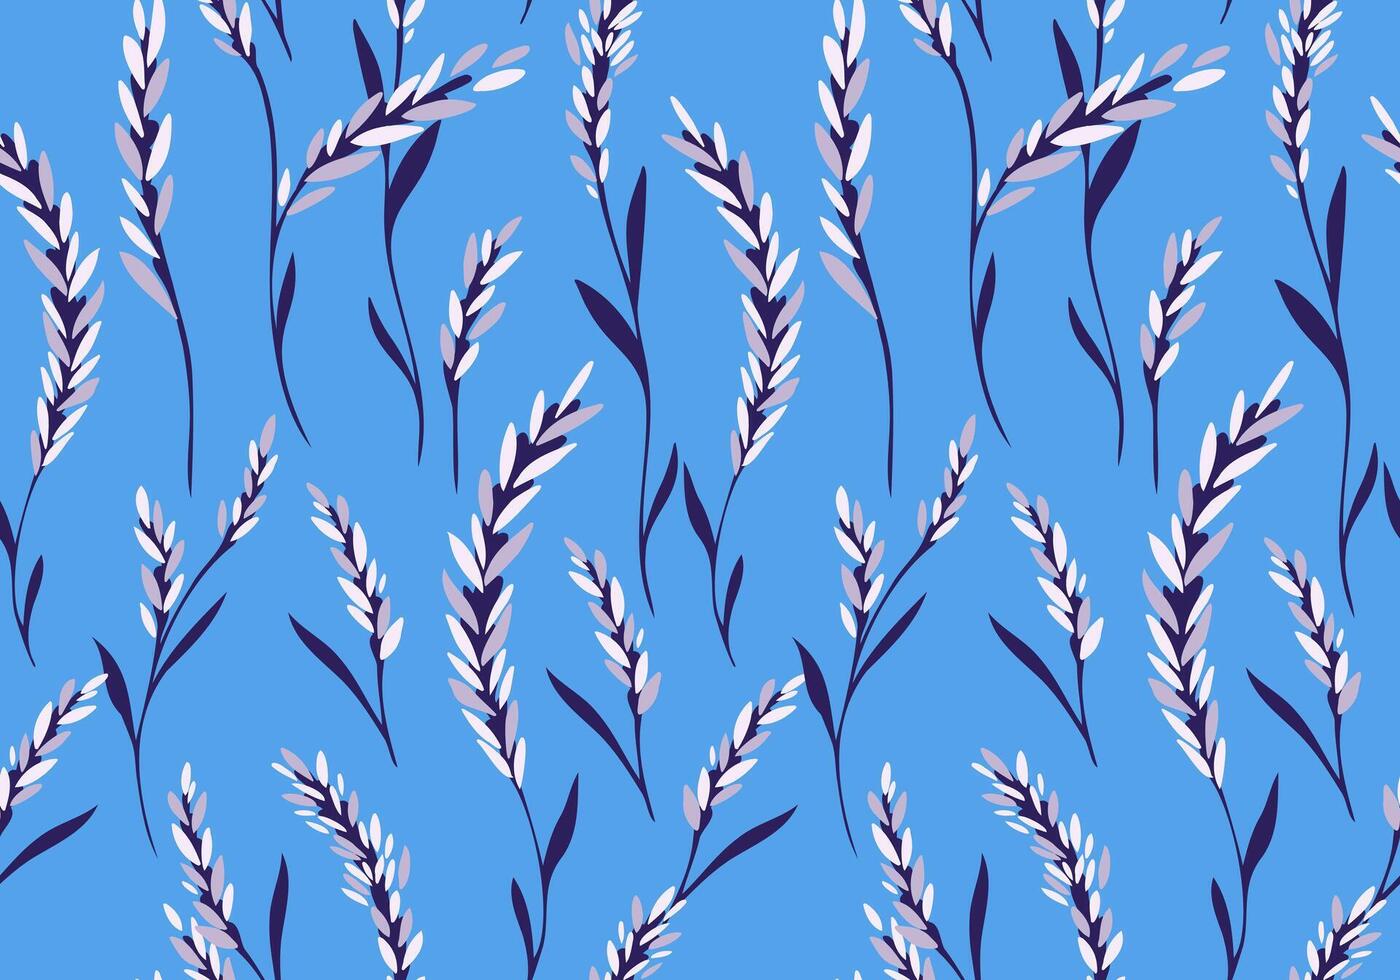 Creative spica branches seamless pattern on a blue background. hand drawn sketch. Abstract artistic simple shapes tiny floral stems printing. Template for designs, fabric, textiles vector